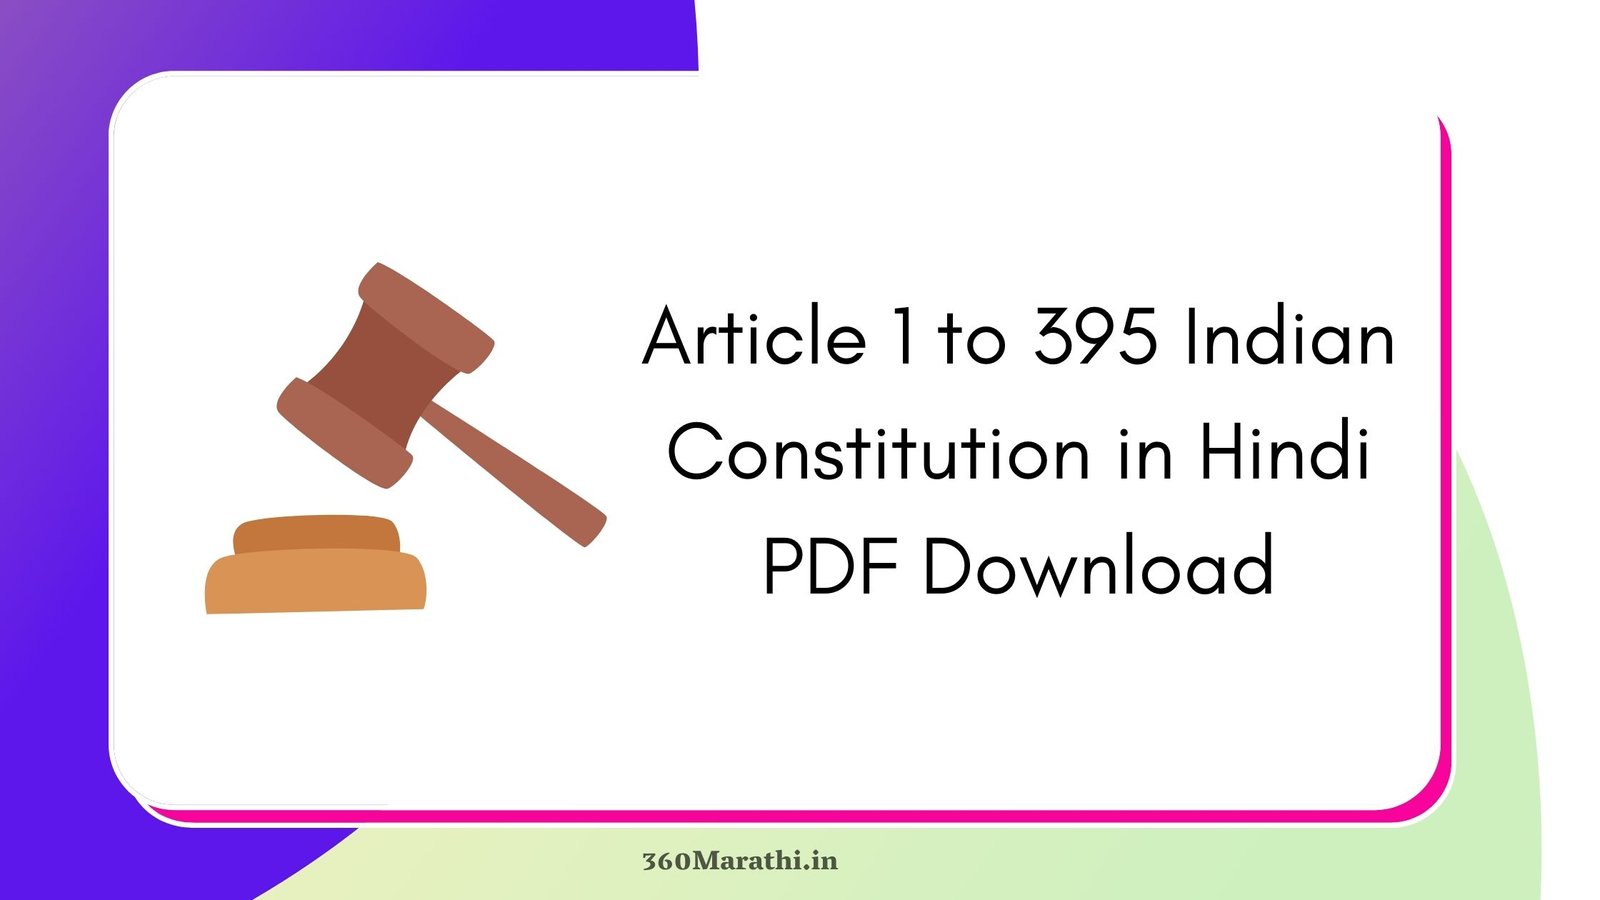 Article 1 to 395 Indian Constitution in Hindi PDF Download